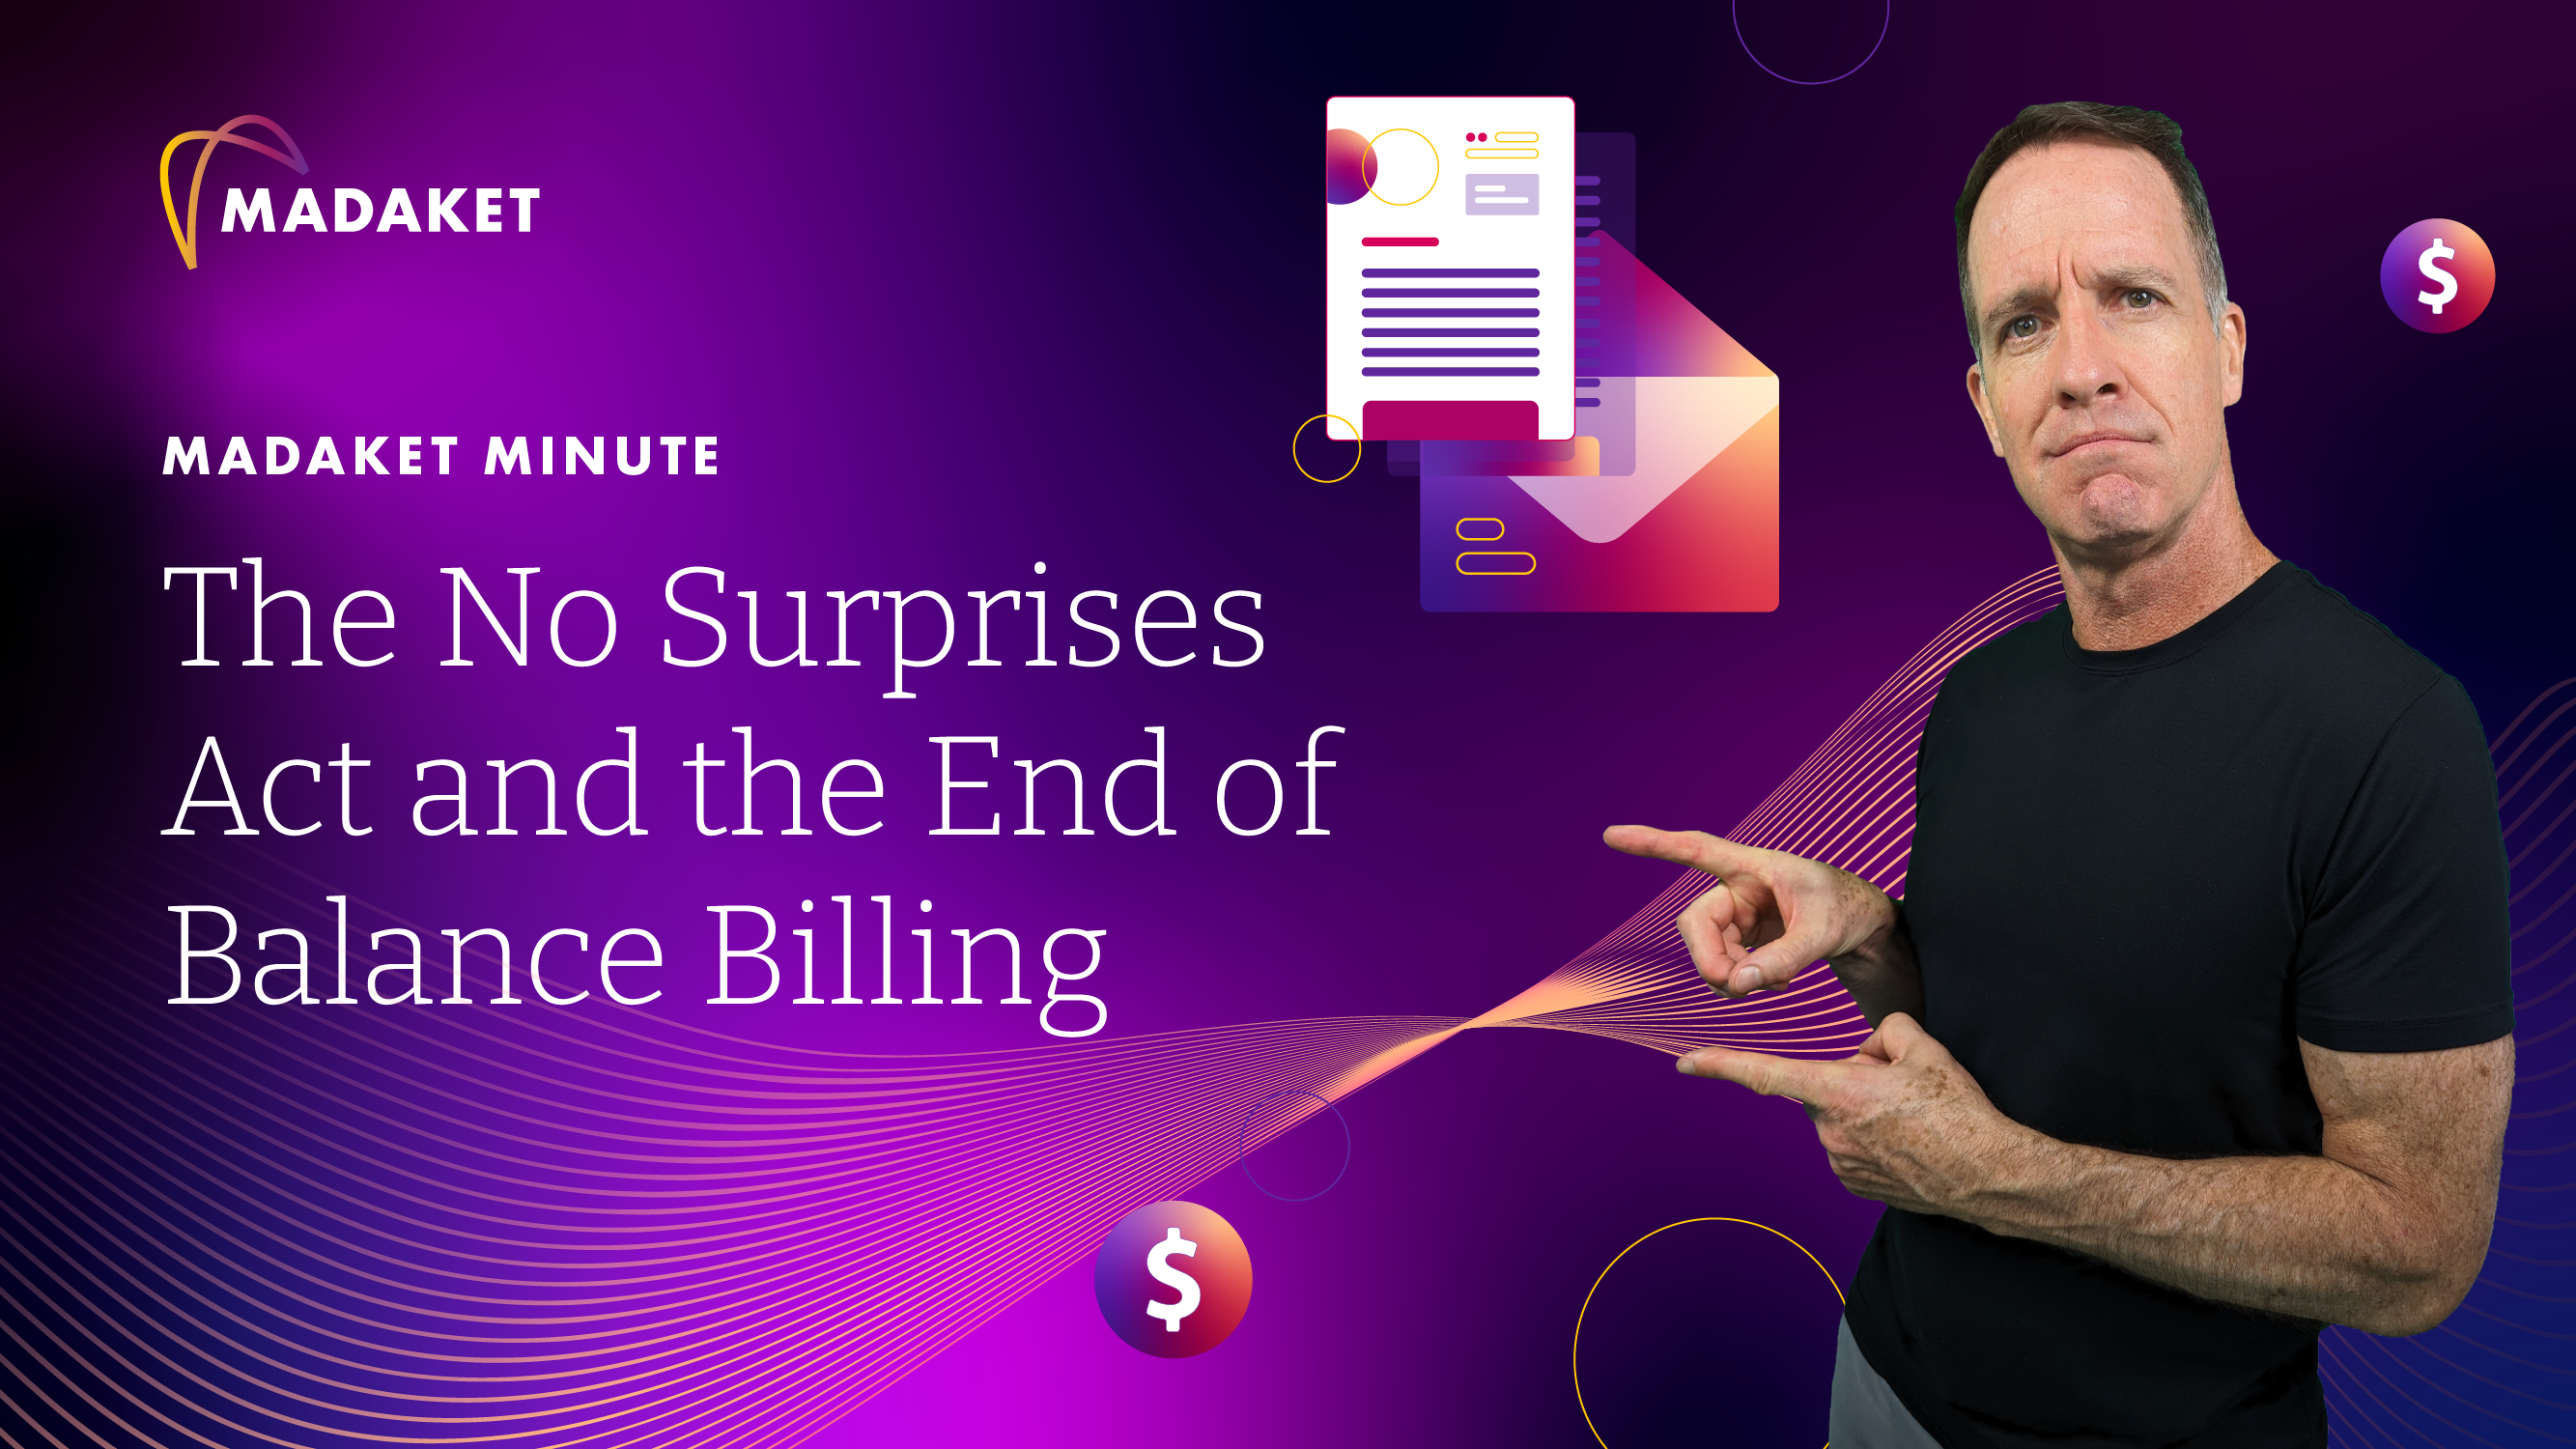 Madaket Minute Feature Image - The No Surprises Act and the End of Balance Billing